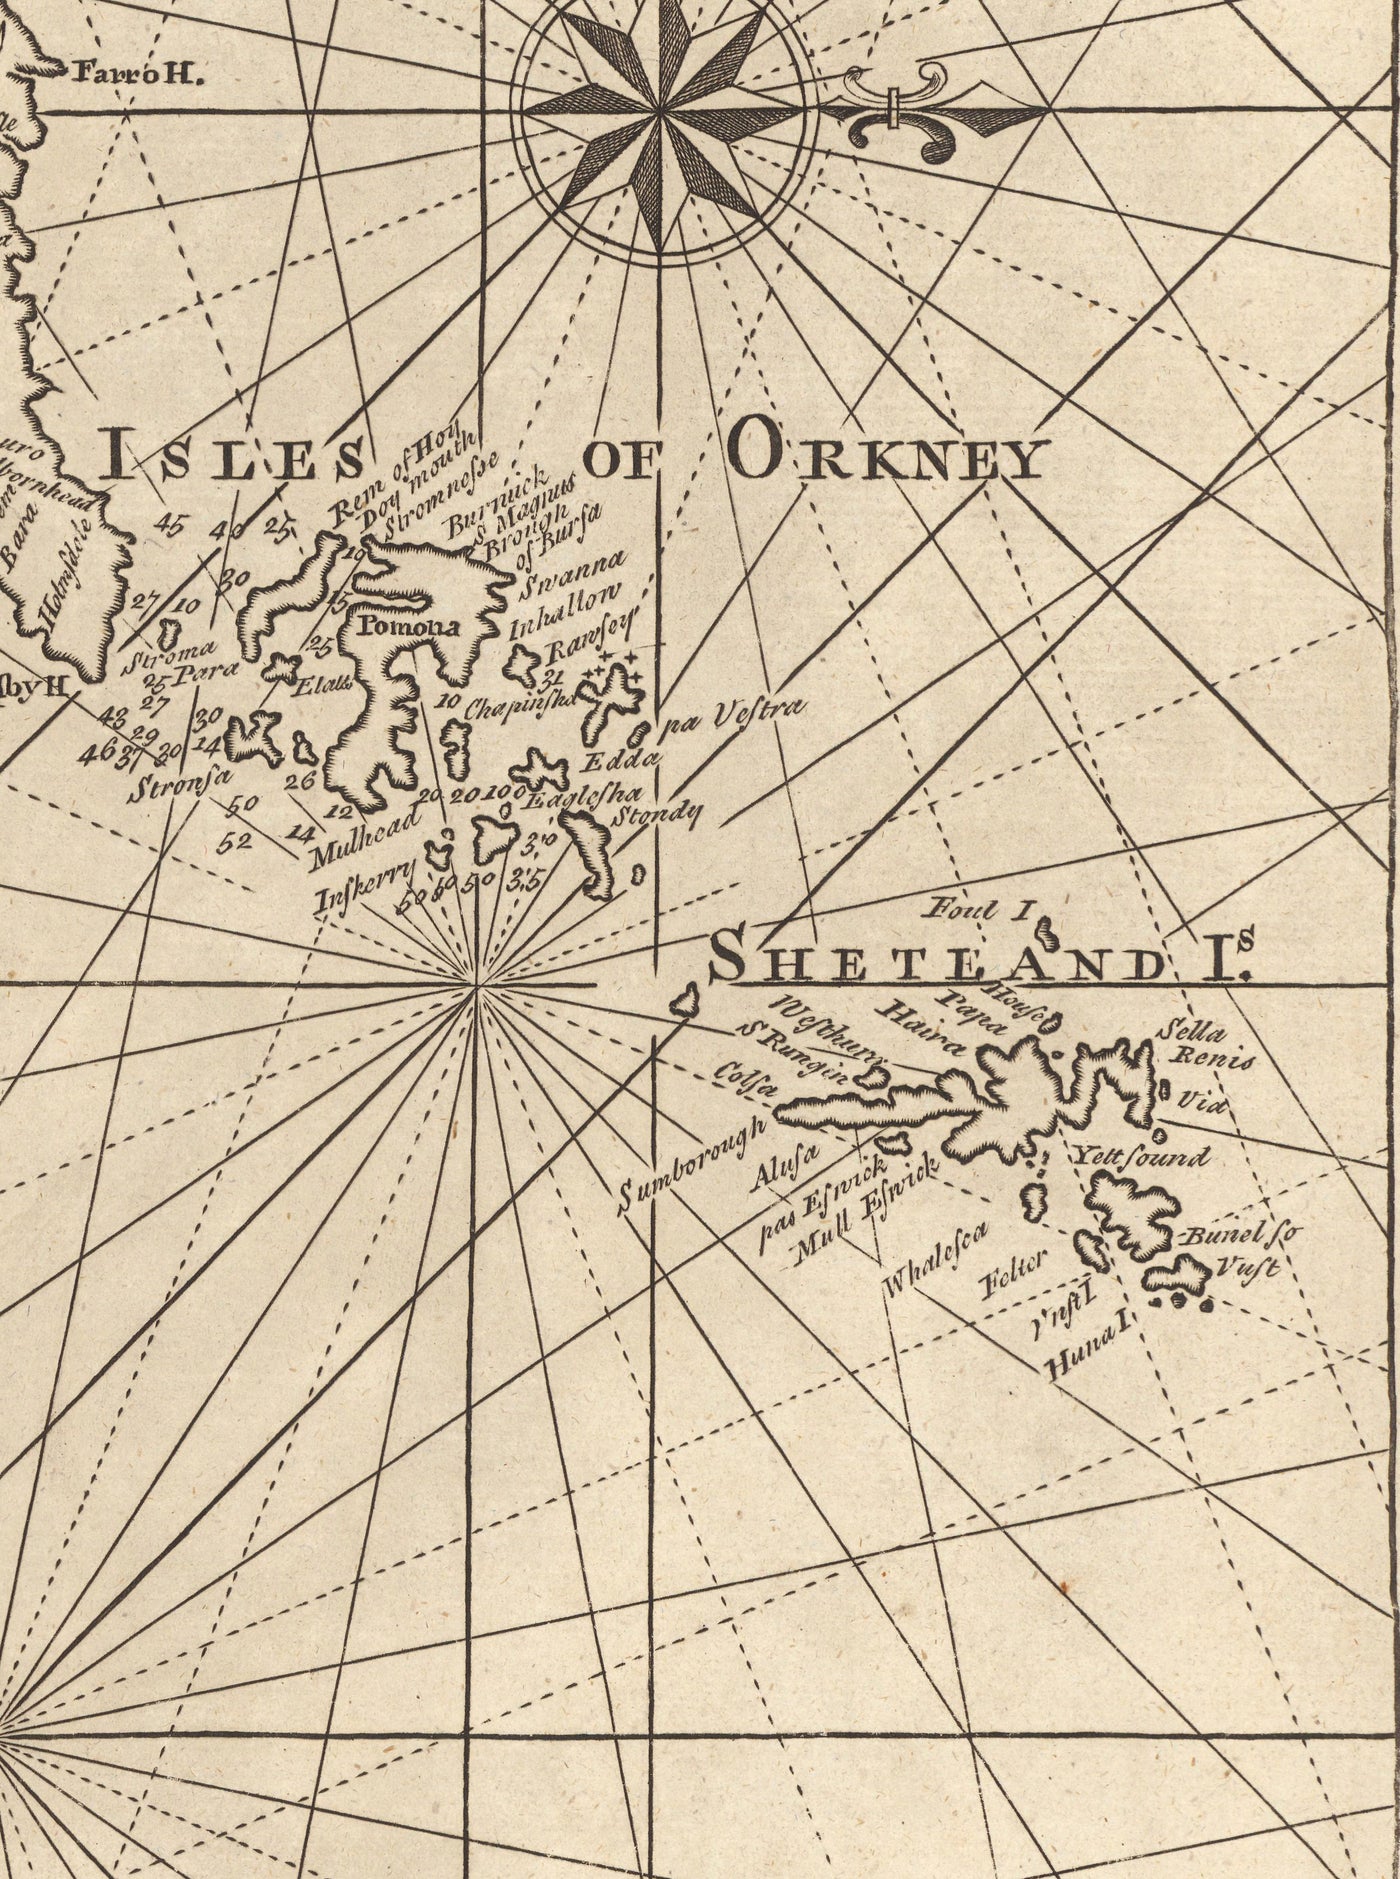 Old British Isles Navigation Chart, 1752 by Page & Mount - Ports, Sailing Distances in Leagues, English Channel